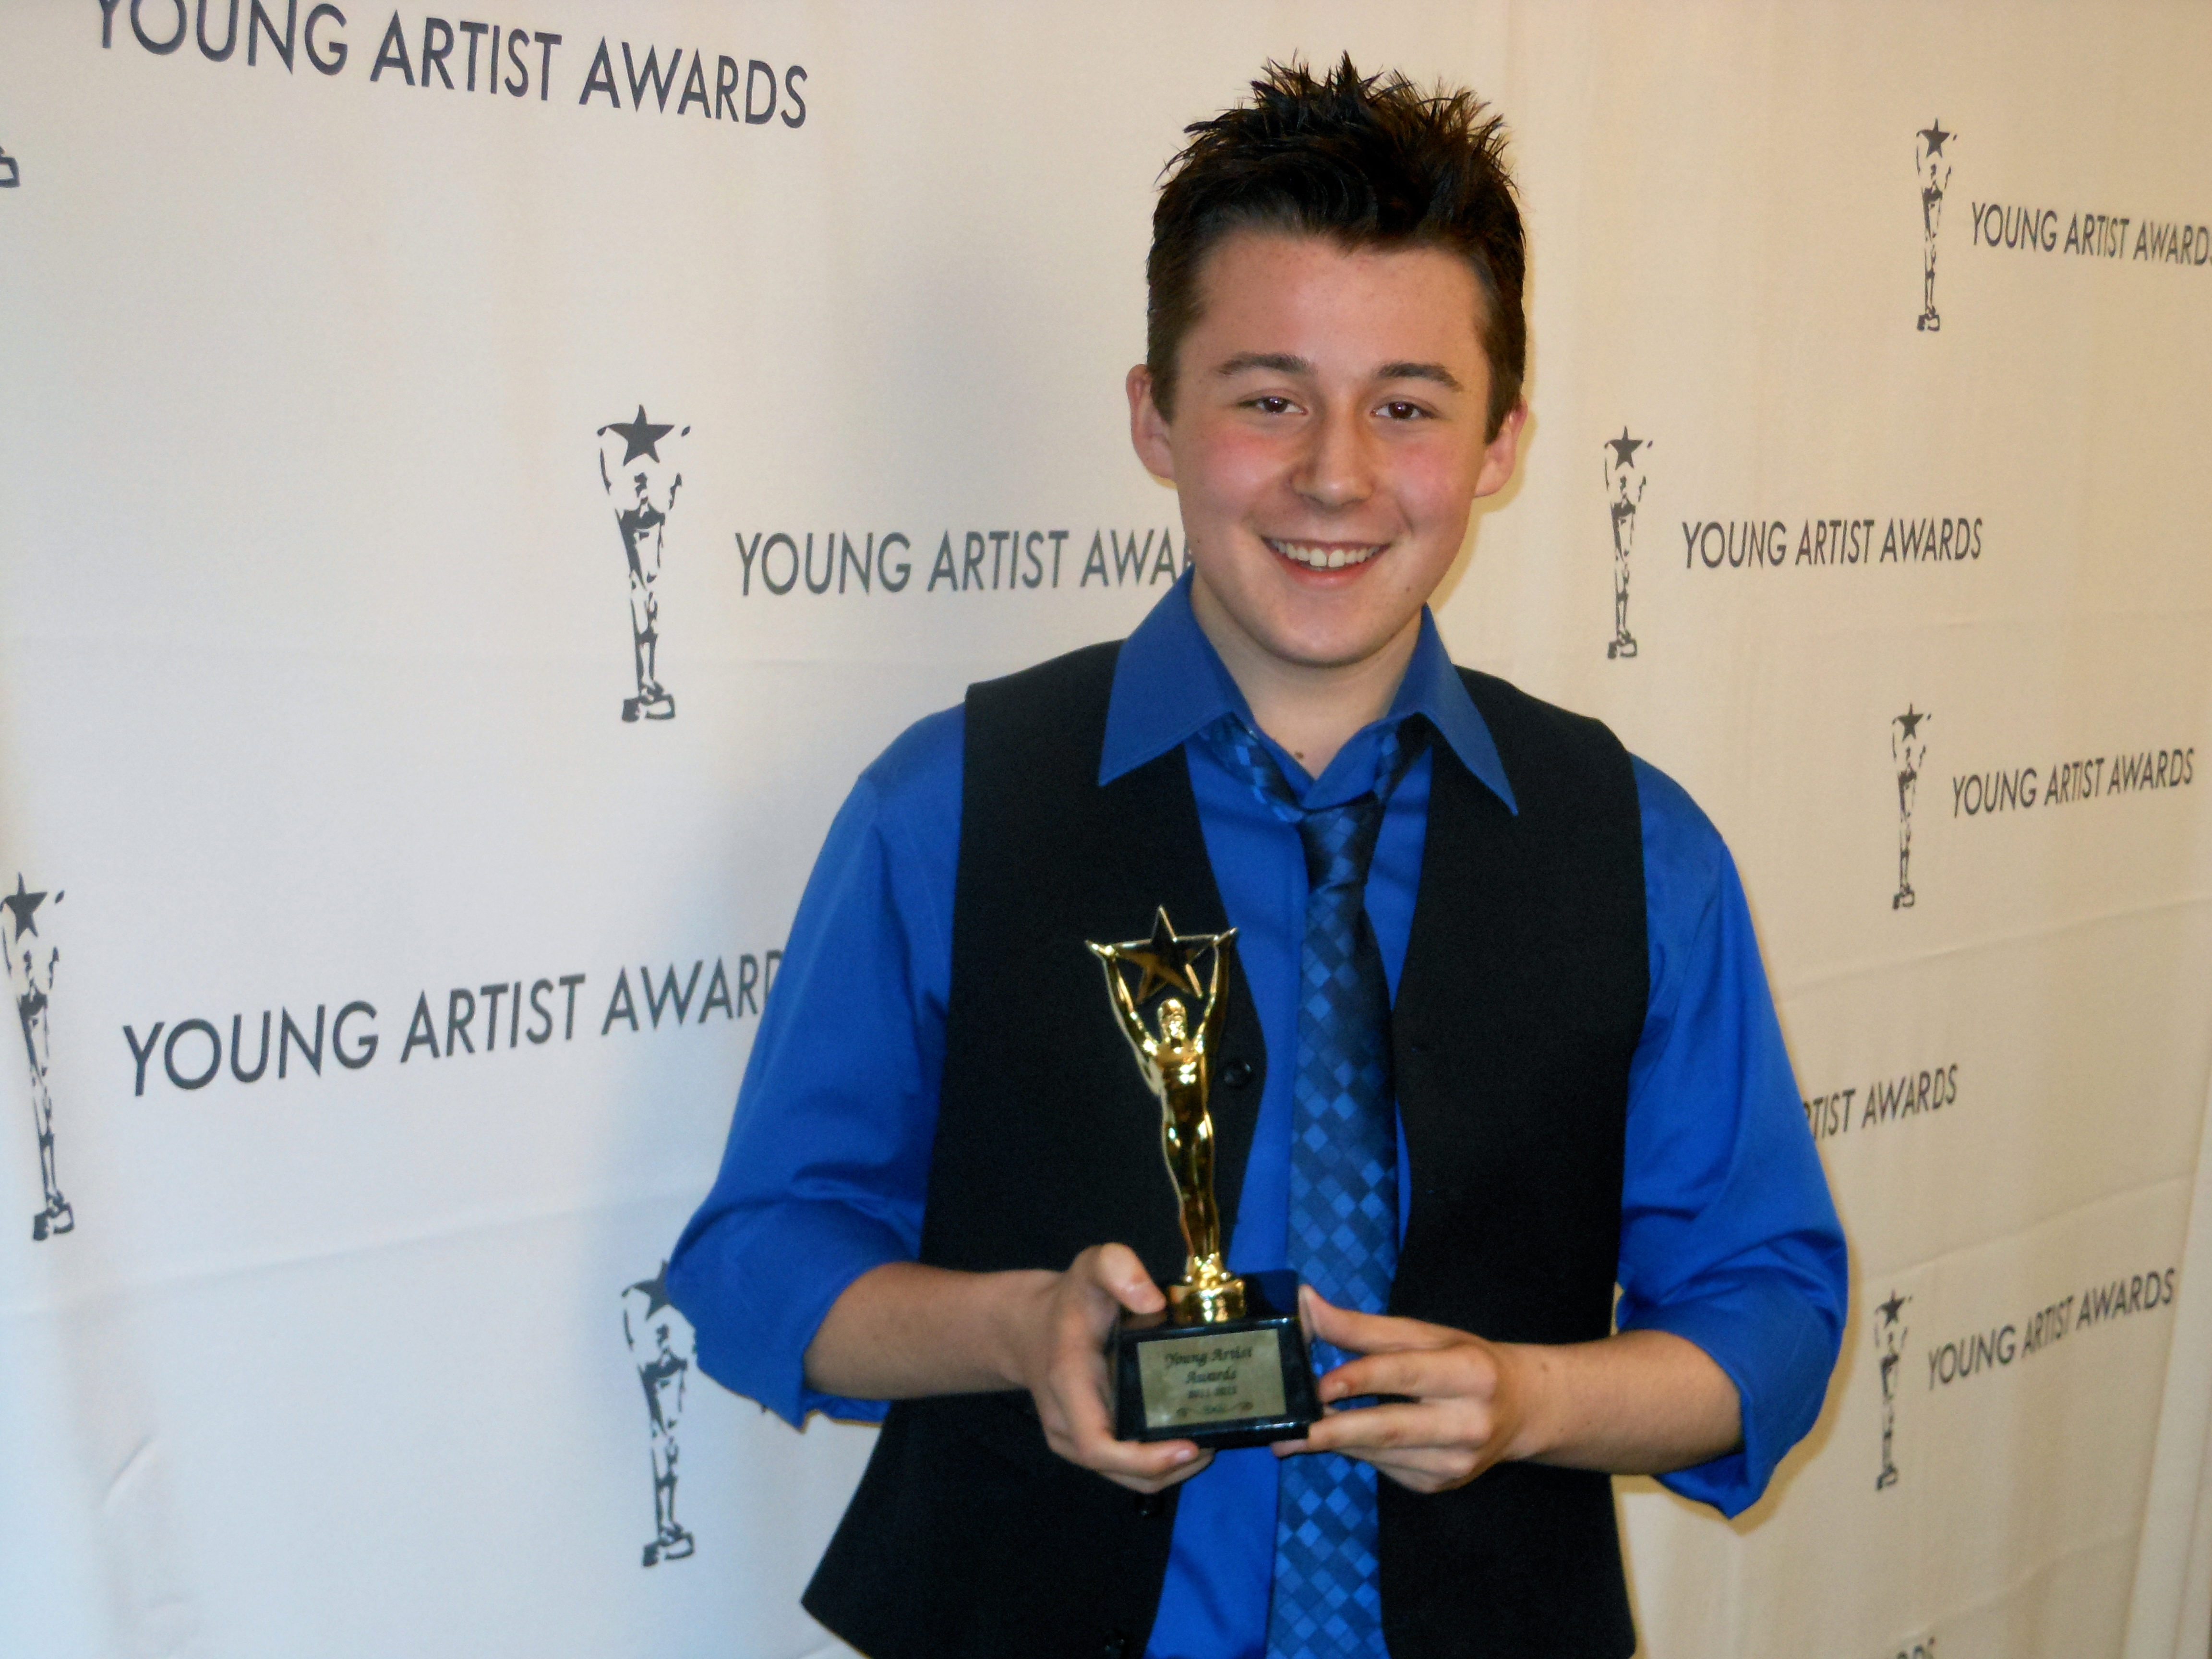 33rd Young Artist Awards, May 6, 2012 - Best Young Supporting Actor in a Feature Film - Bad Teacher, Columbia Pictures